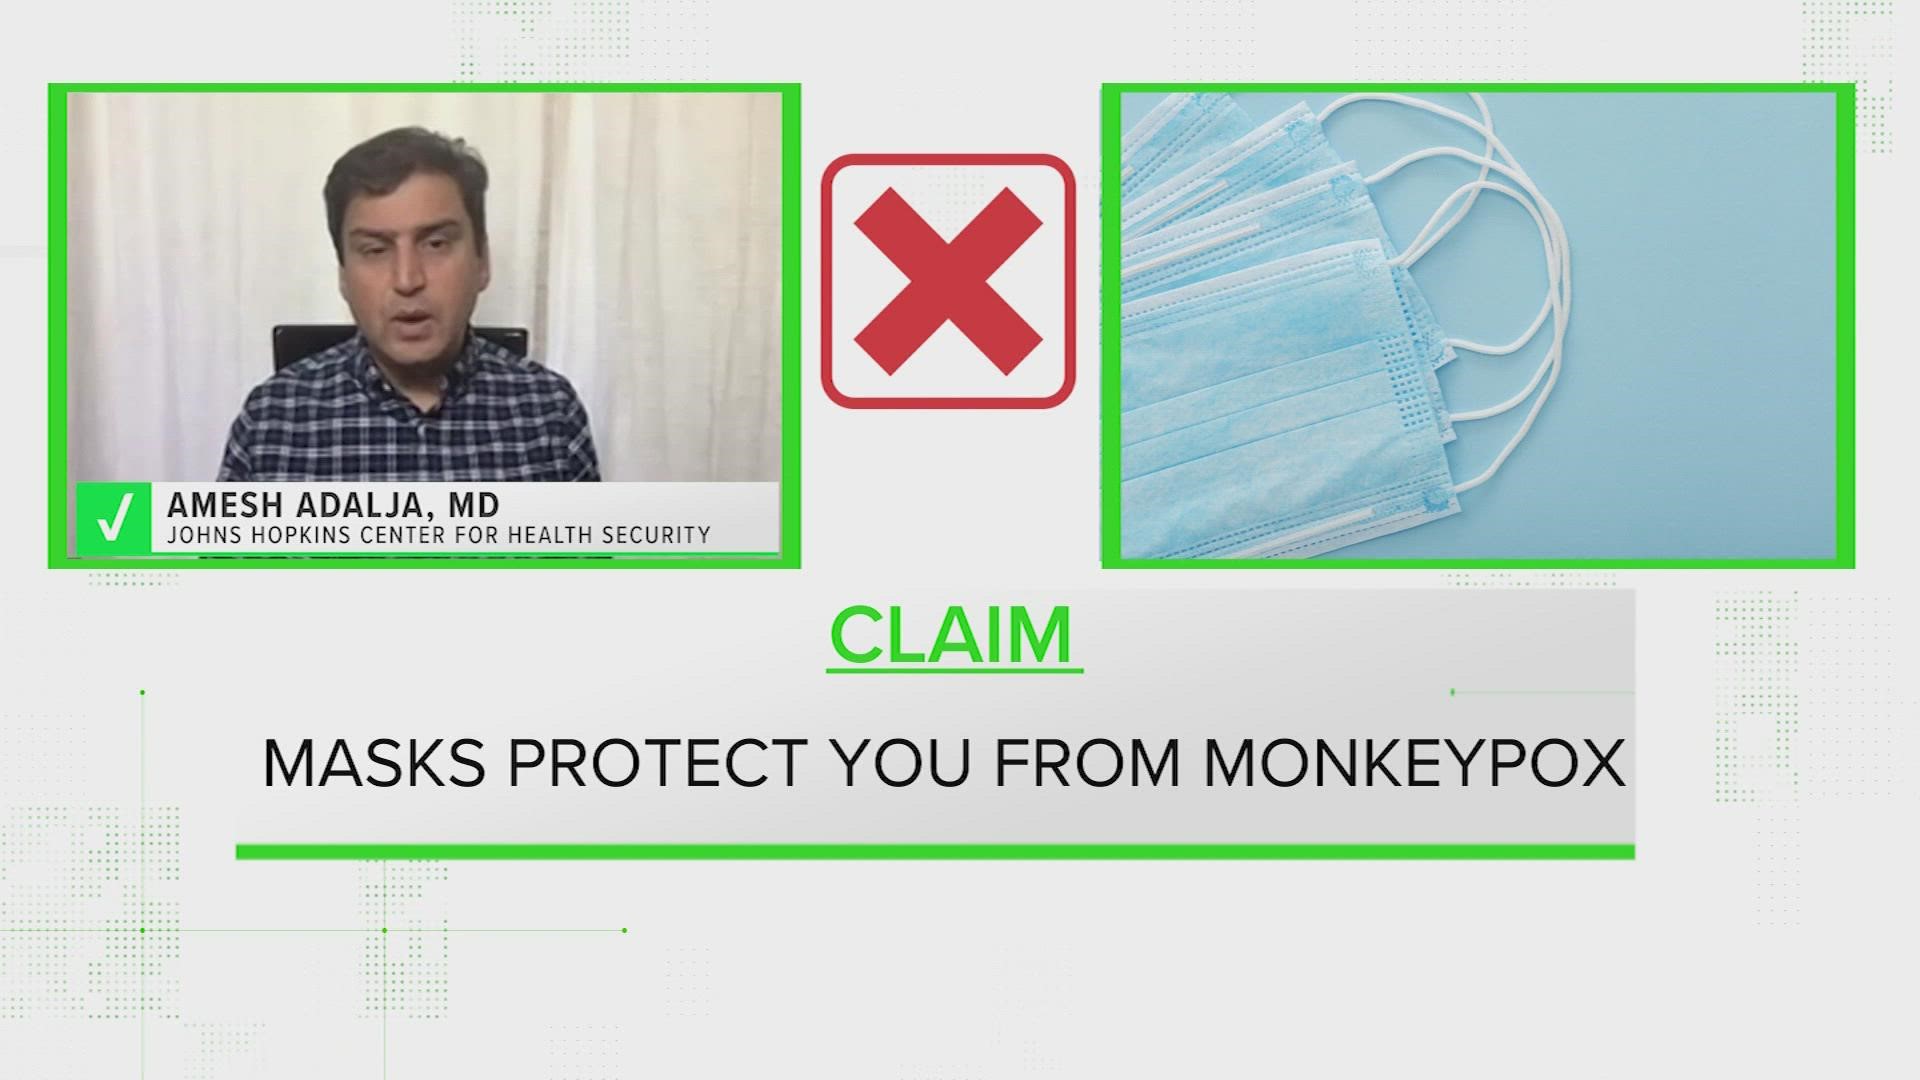 There are a lot of rumors going around social media about the monkeypox virus. The VERIFY team is working hard to make sure you know what is true and what is not.